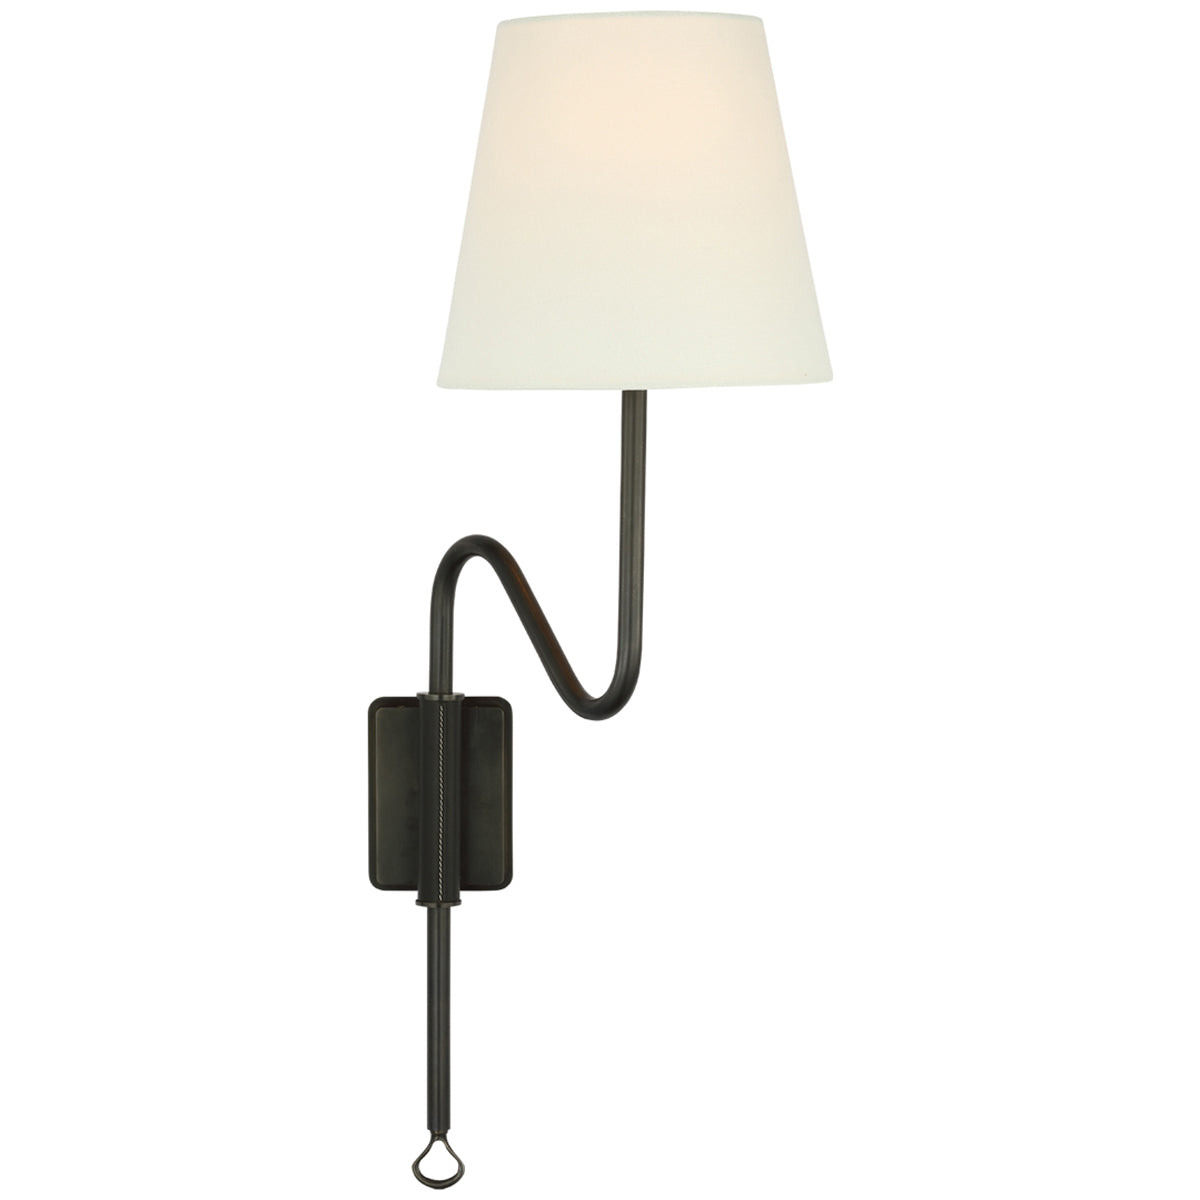 Visual Comfort Griffin Articulating Sconce